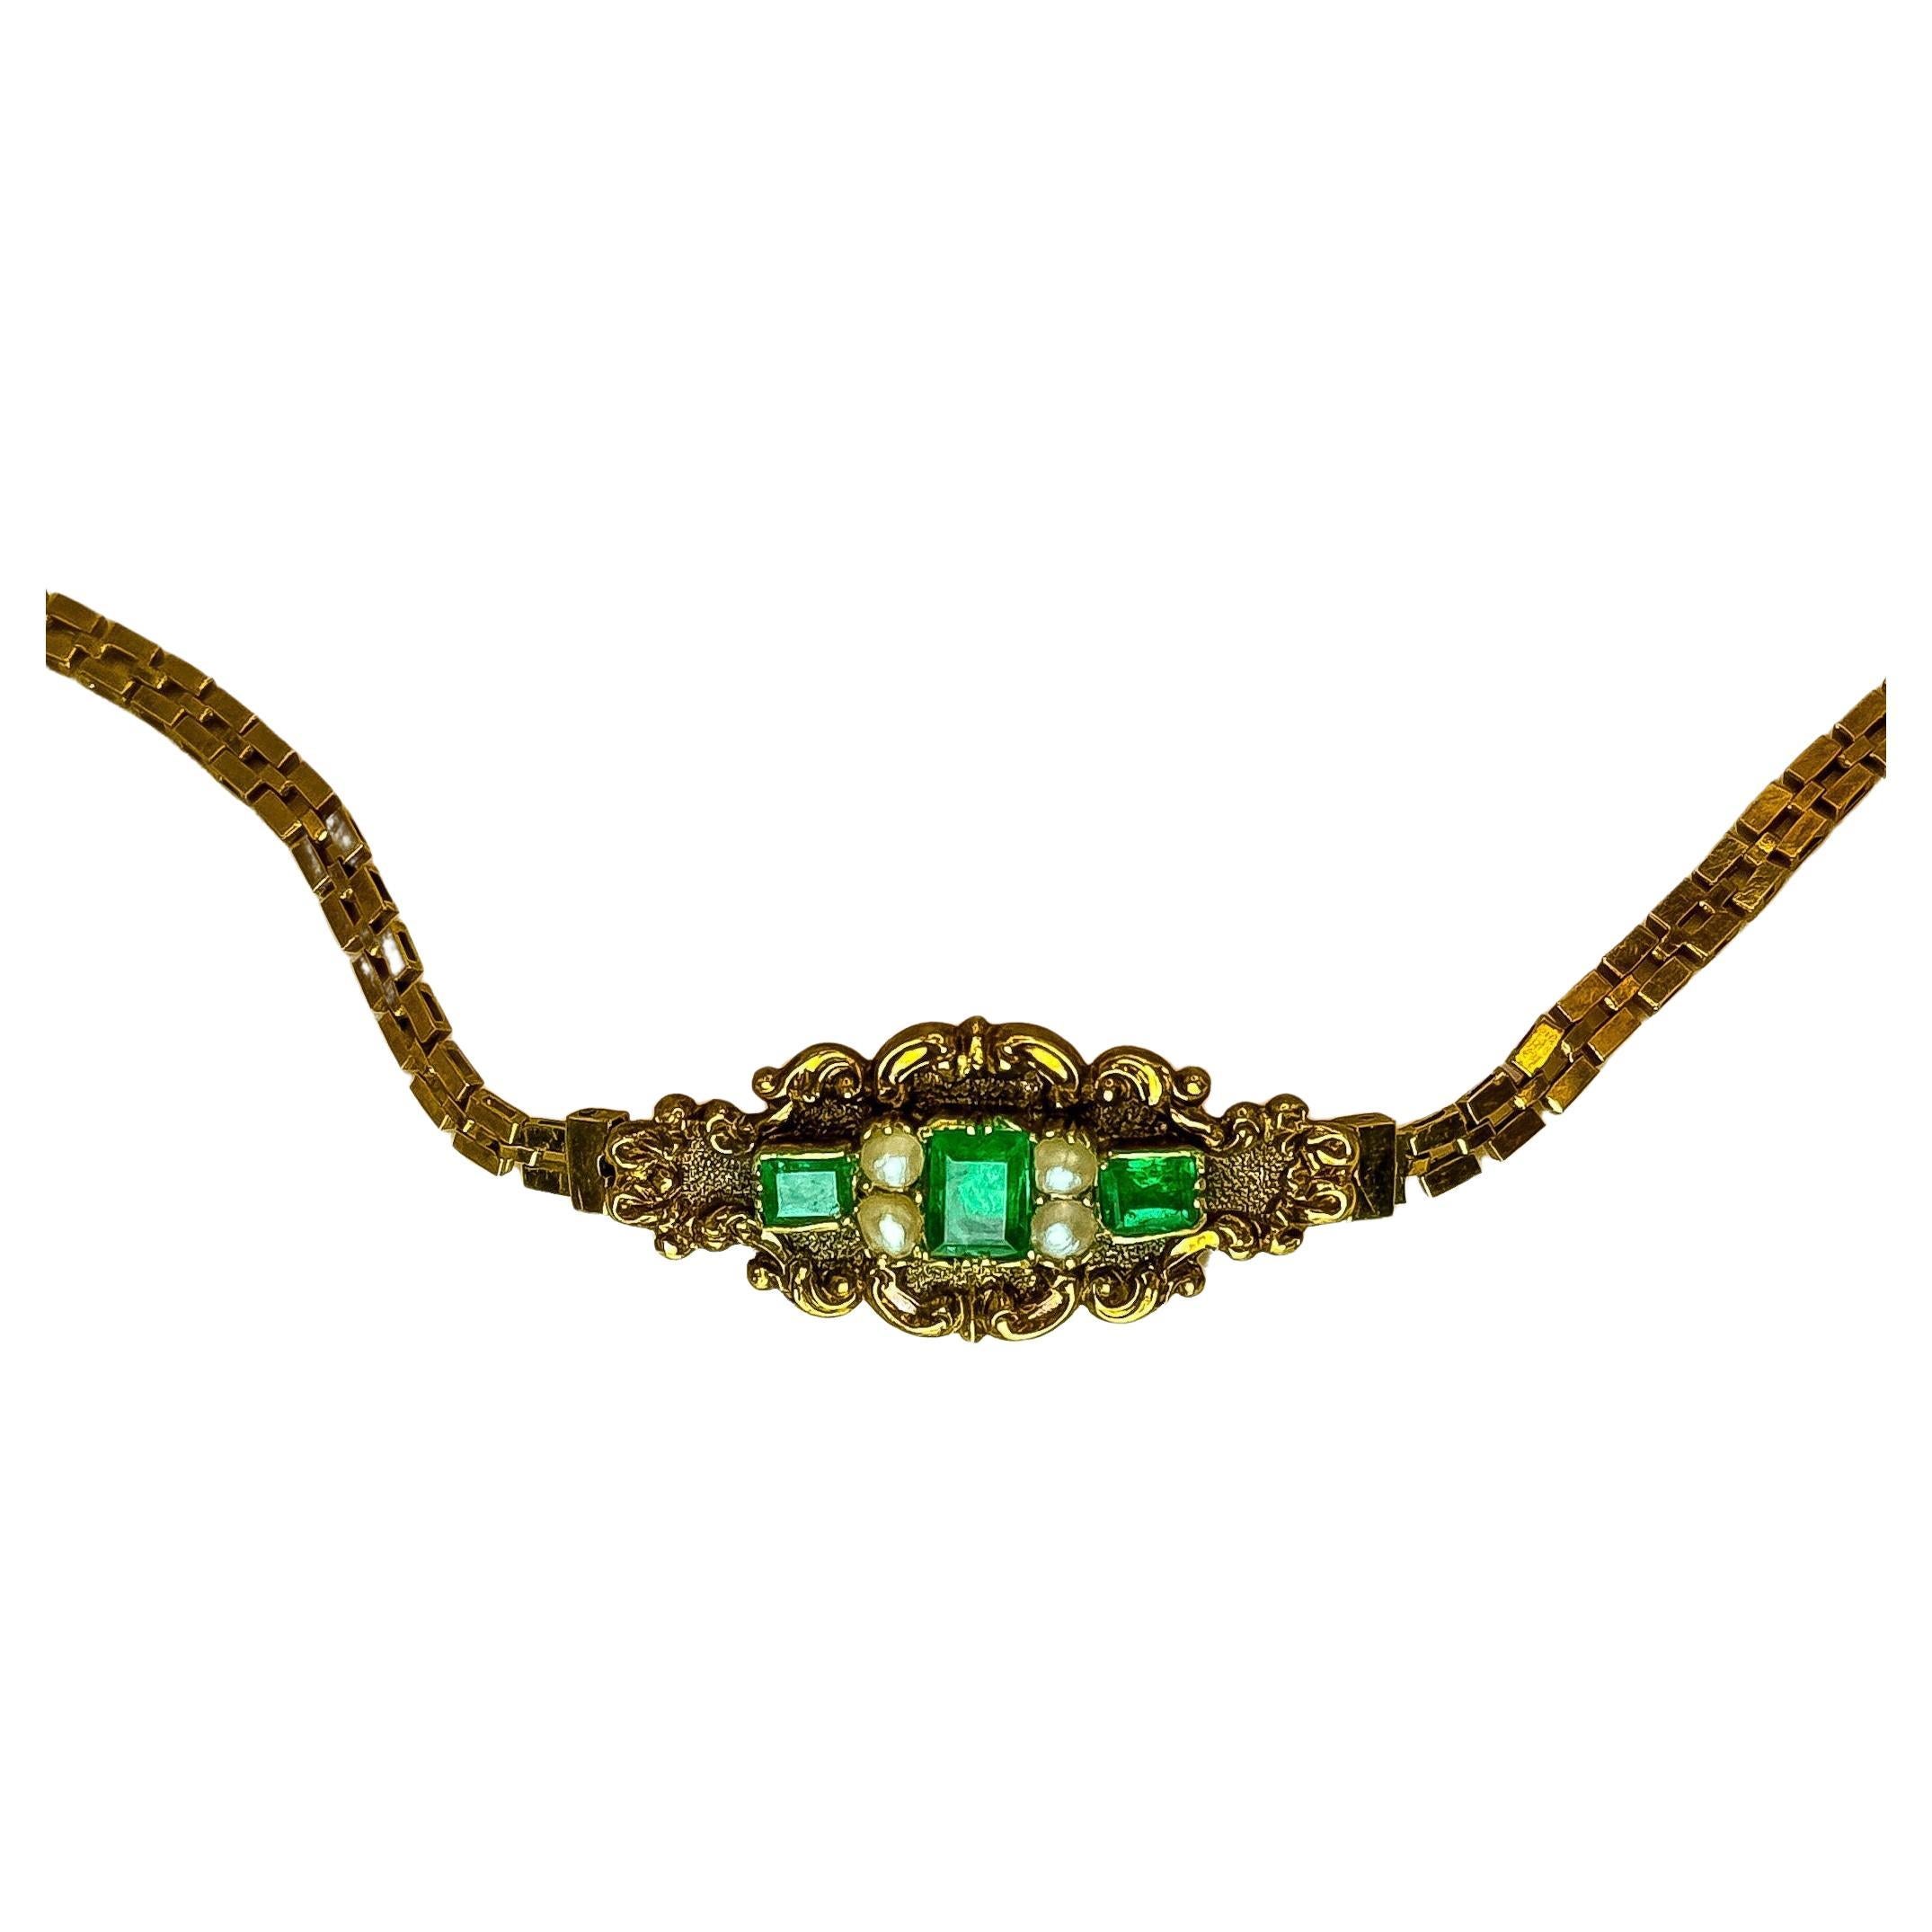 Vintage antique bracelet crafted in 18K gold featuring r natural emeralds.
Indulge in the splendour of history with this magnificent bracelet, a tribute to the luxurious craftsmanship of the Victorian era. This stunning piece is meticulously